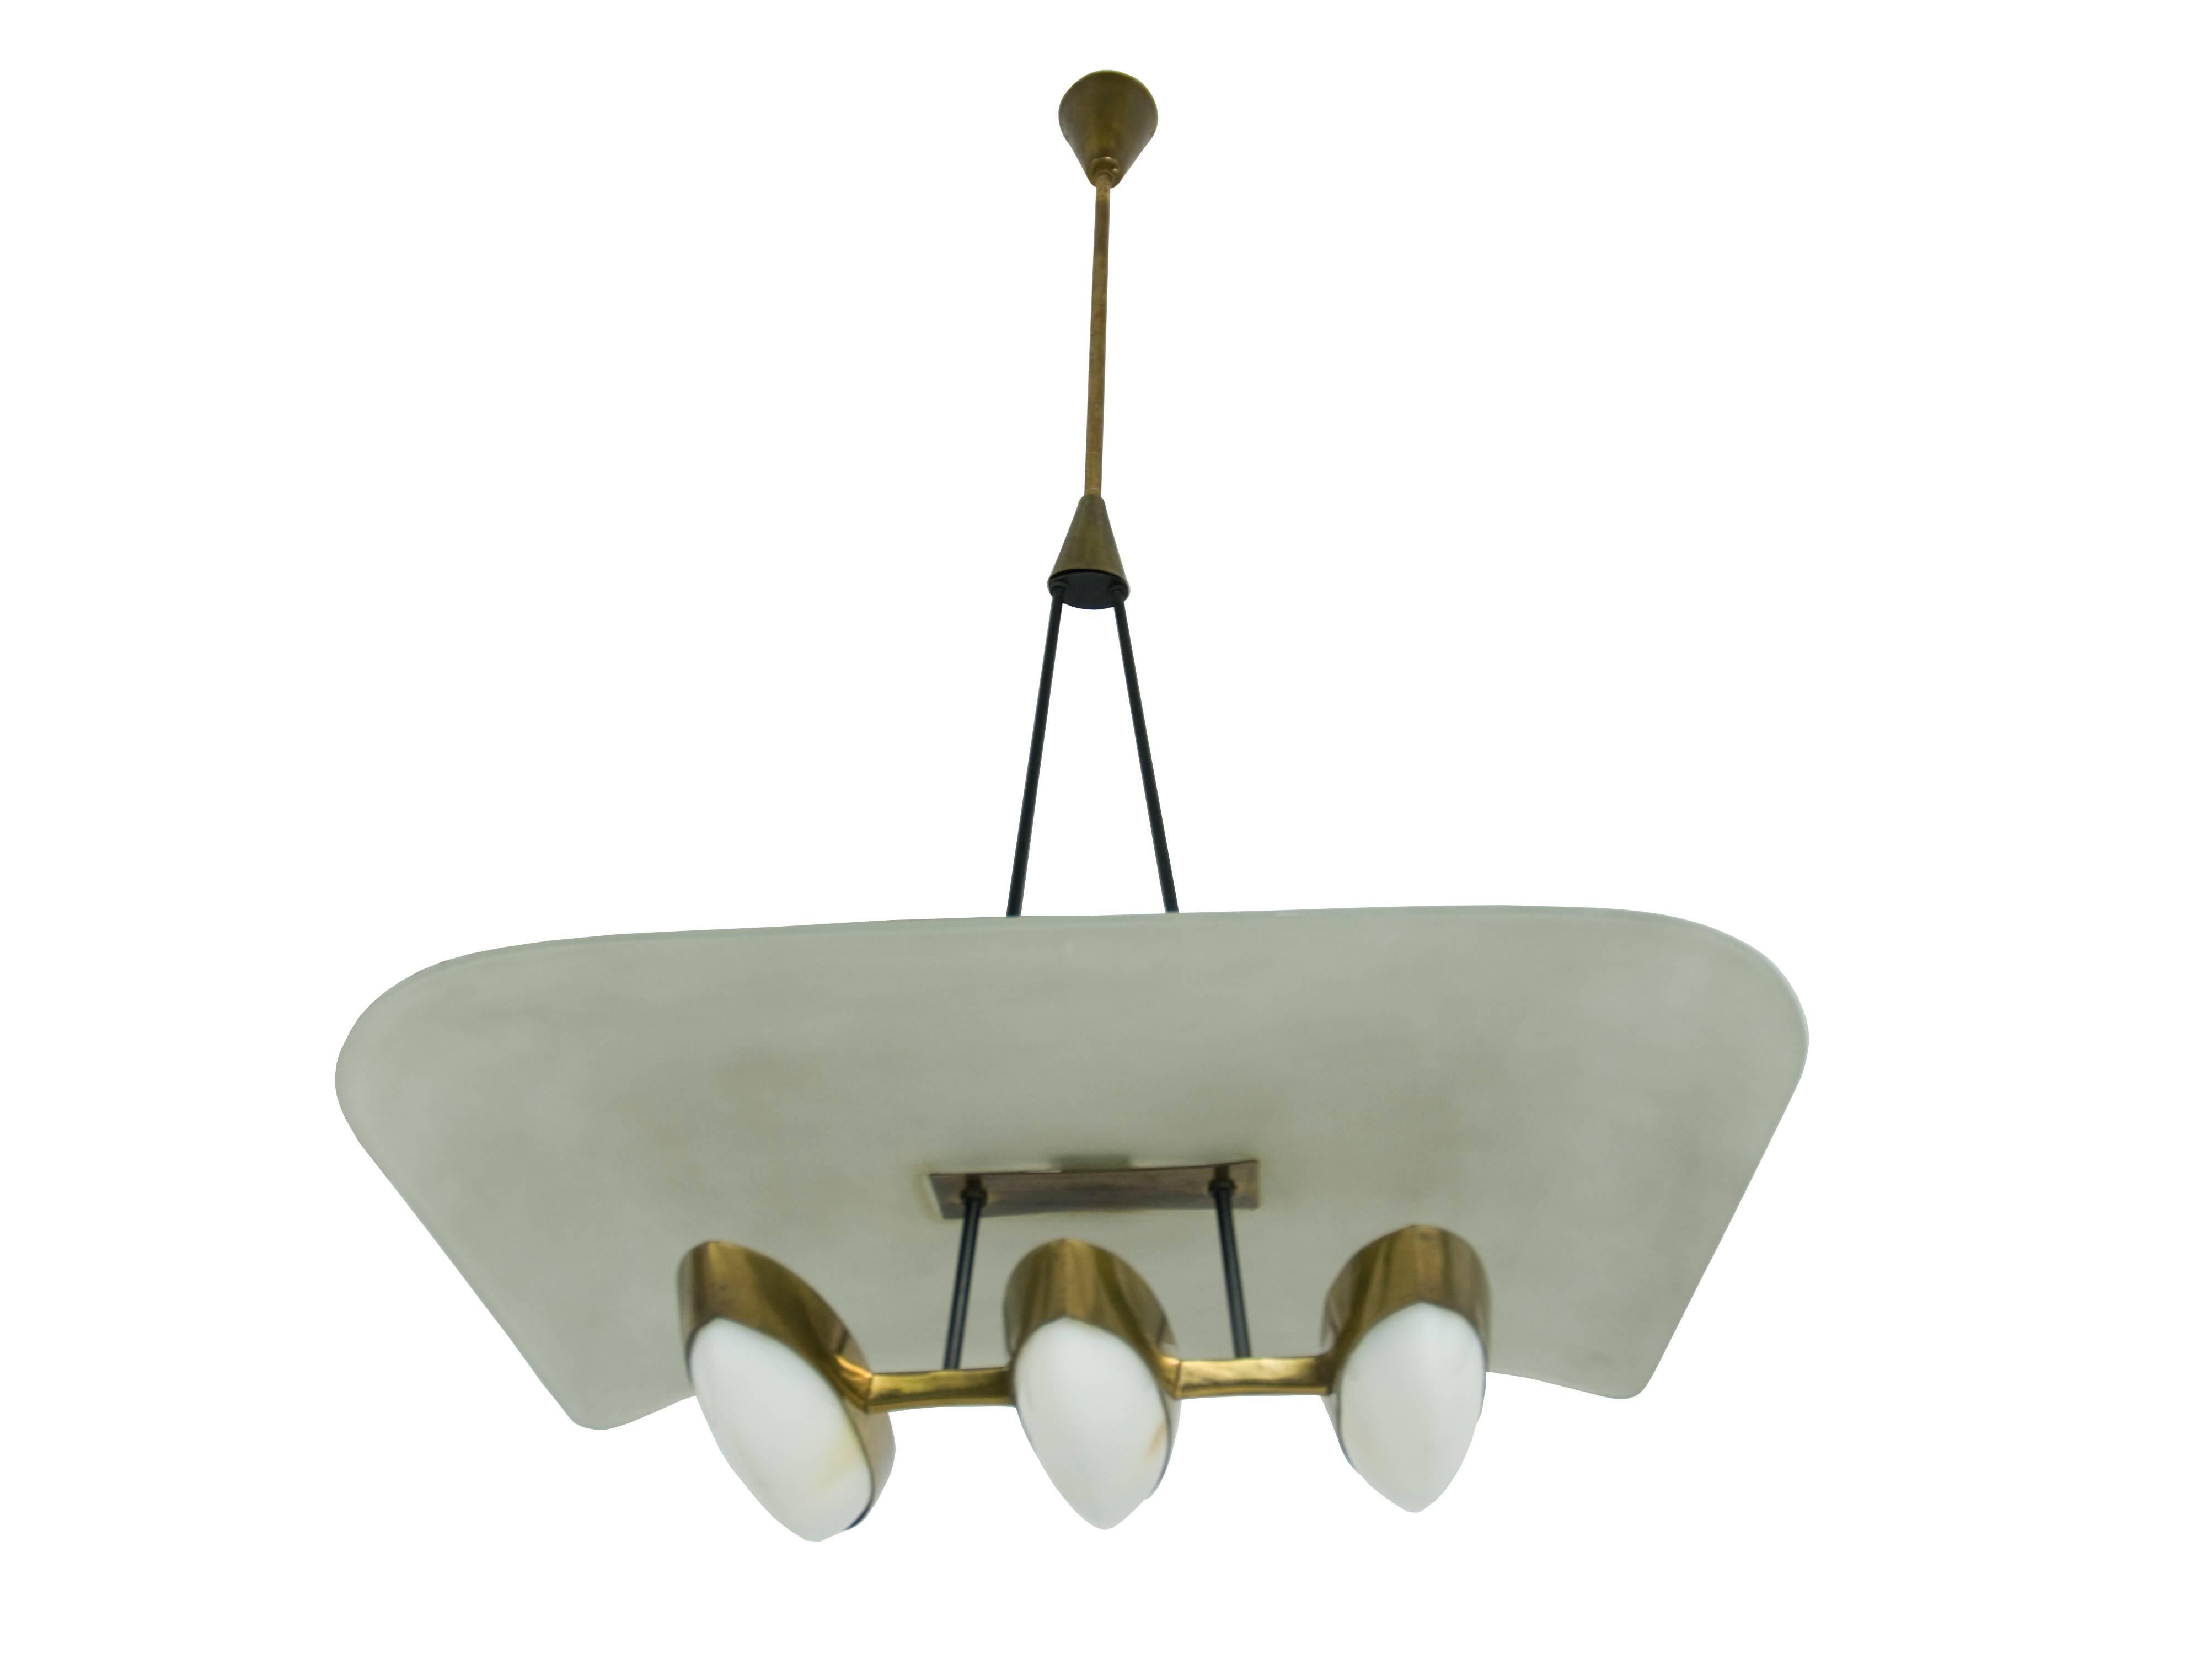 This three-light chandelier, attributed to Arredoluce production, was produced in Italy, circa 1950s. It is made from a brass and metal structure with three eye-shaped perspex bulb holders and a bent opaline glass shade. Overall good vintage